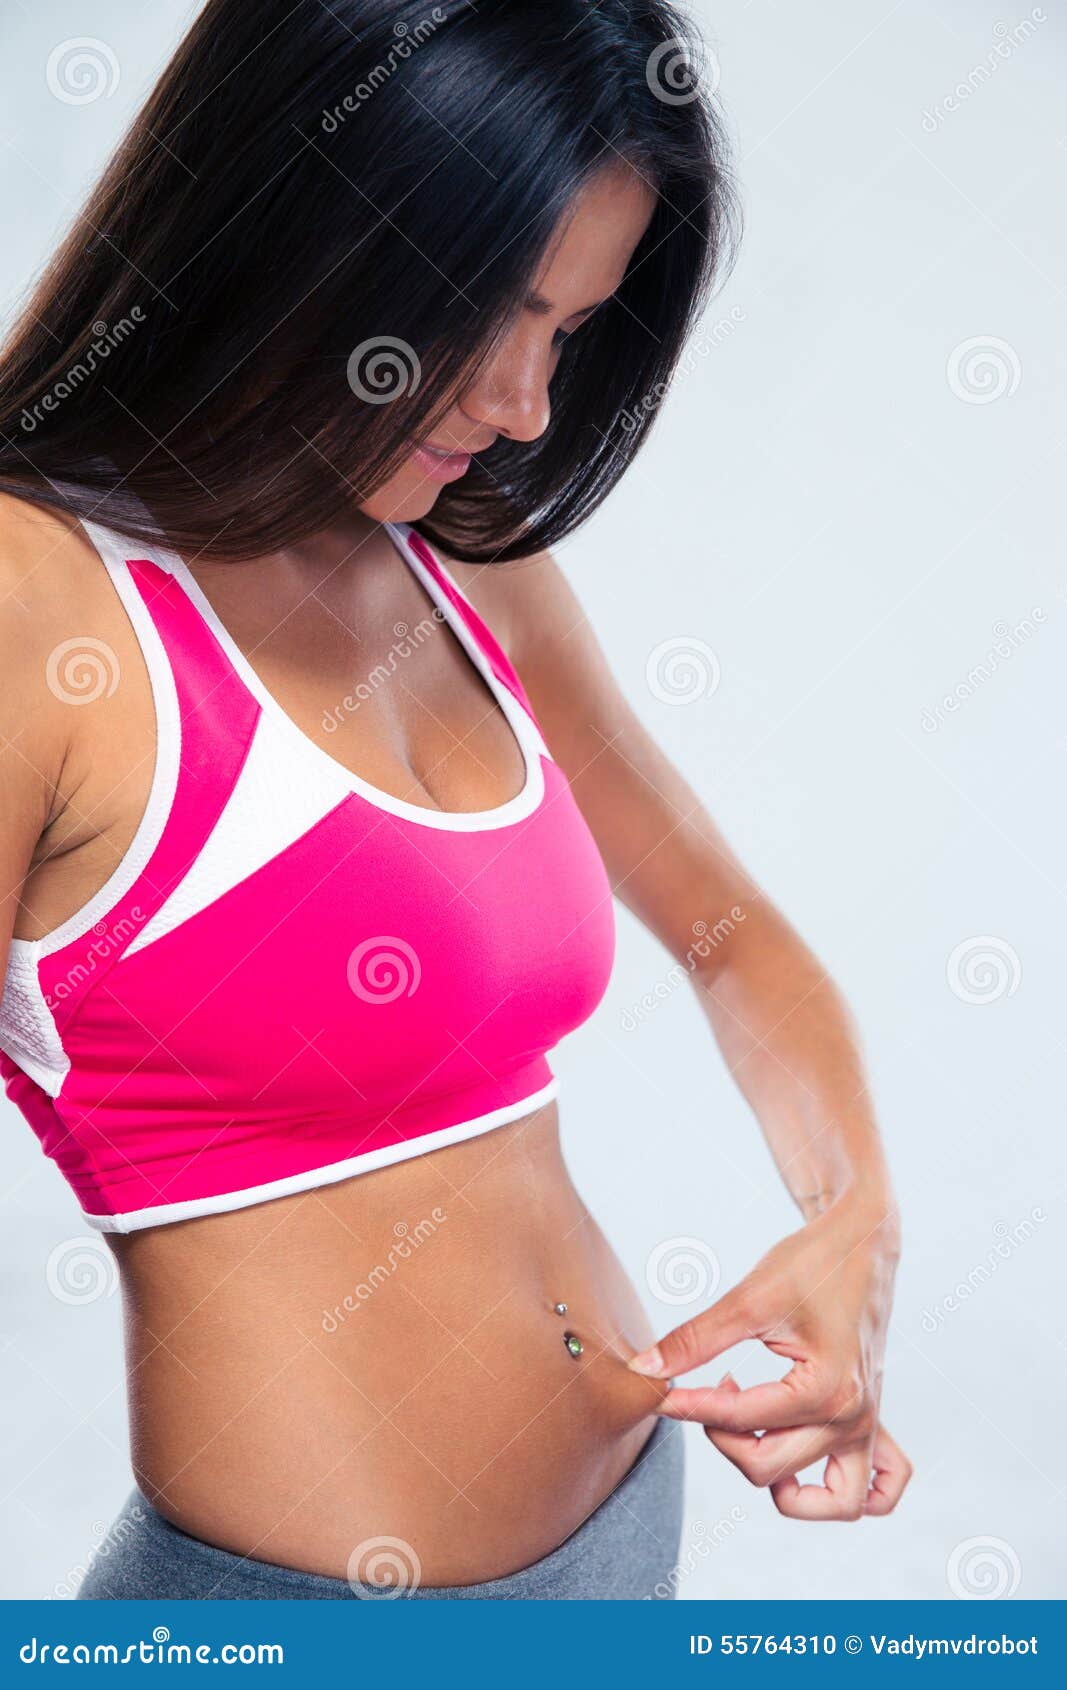 Woman in Underwear Touching Her Belly on White Background, Closeup